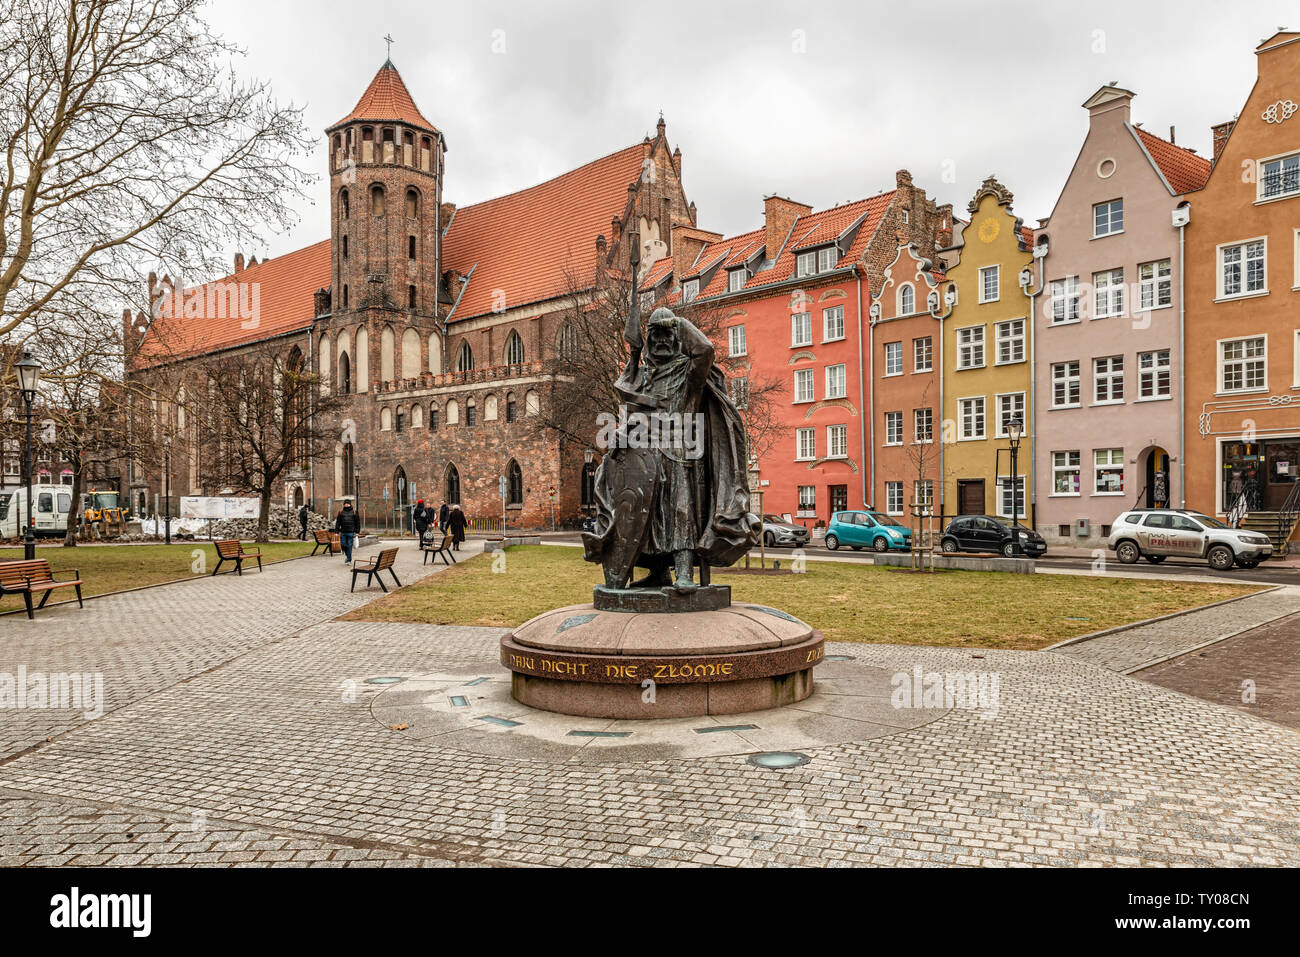 Gdansk, Poland - Feb 14, 2019: View at the medieval knight, warrior monument and St Nicholas catholic church in Gdansk, Poland. Stock Photo